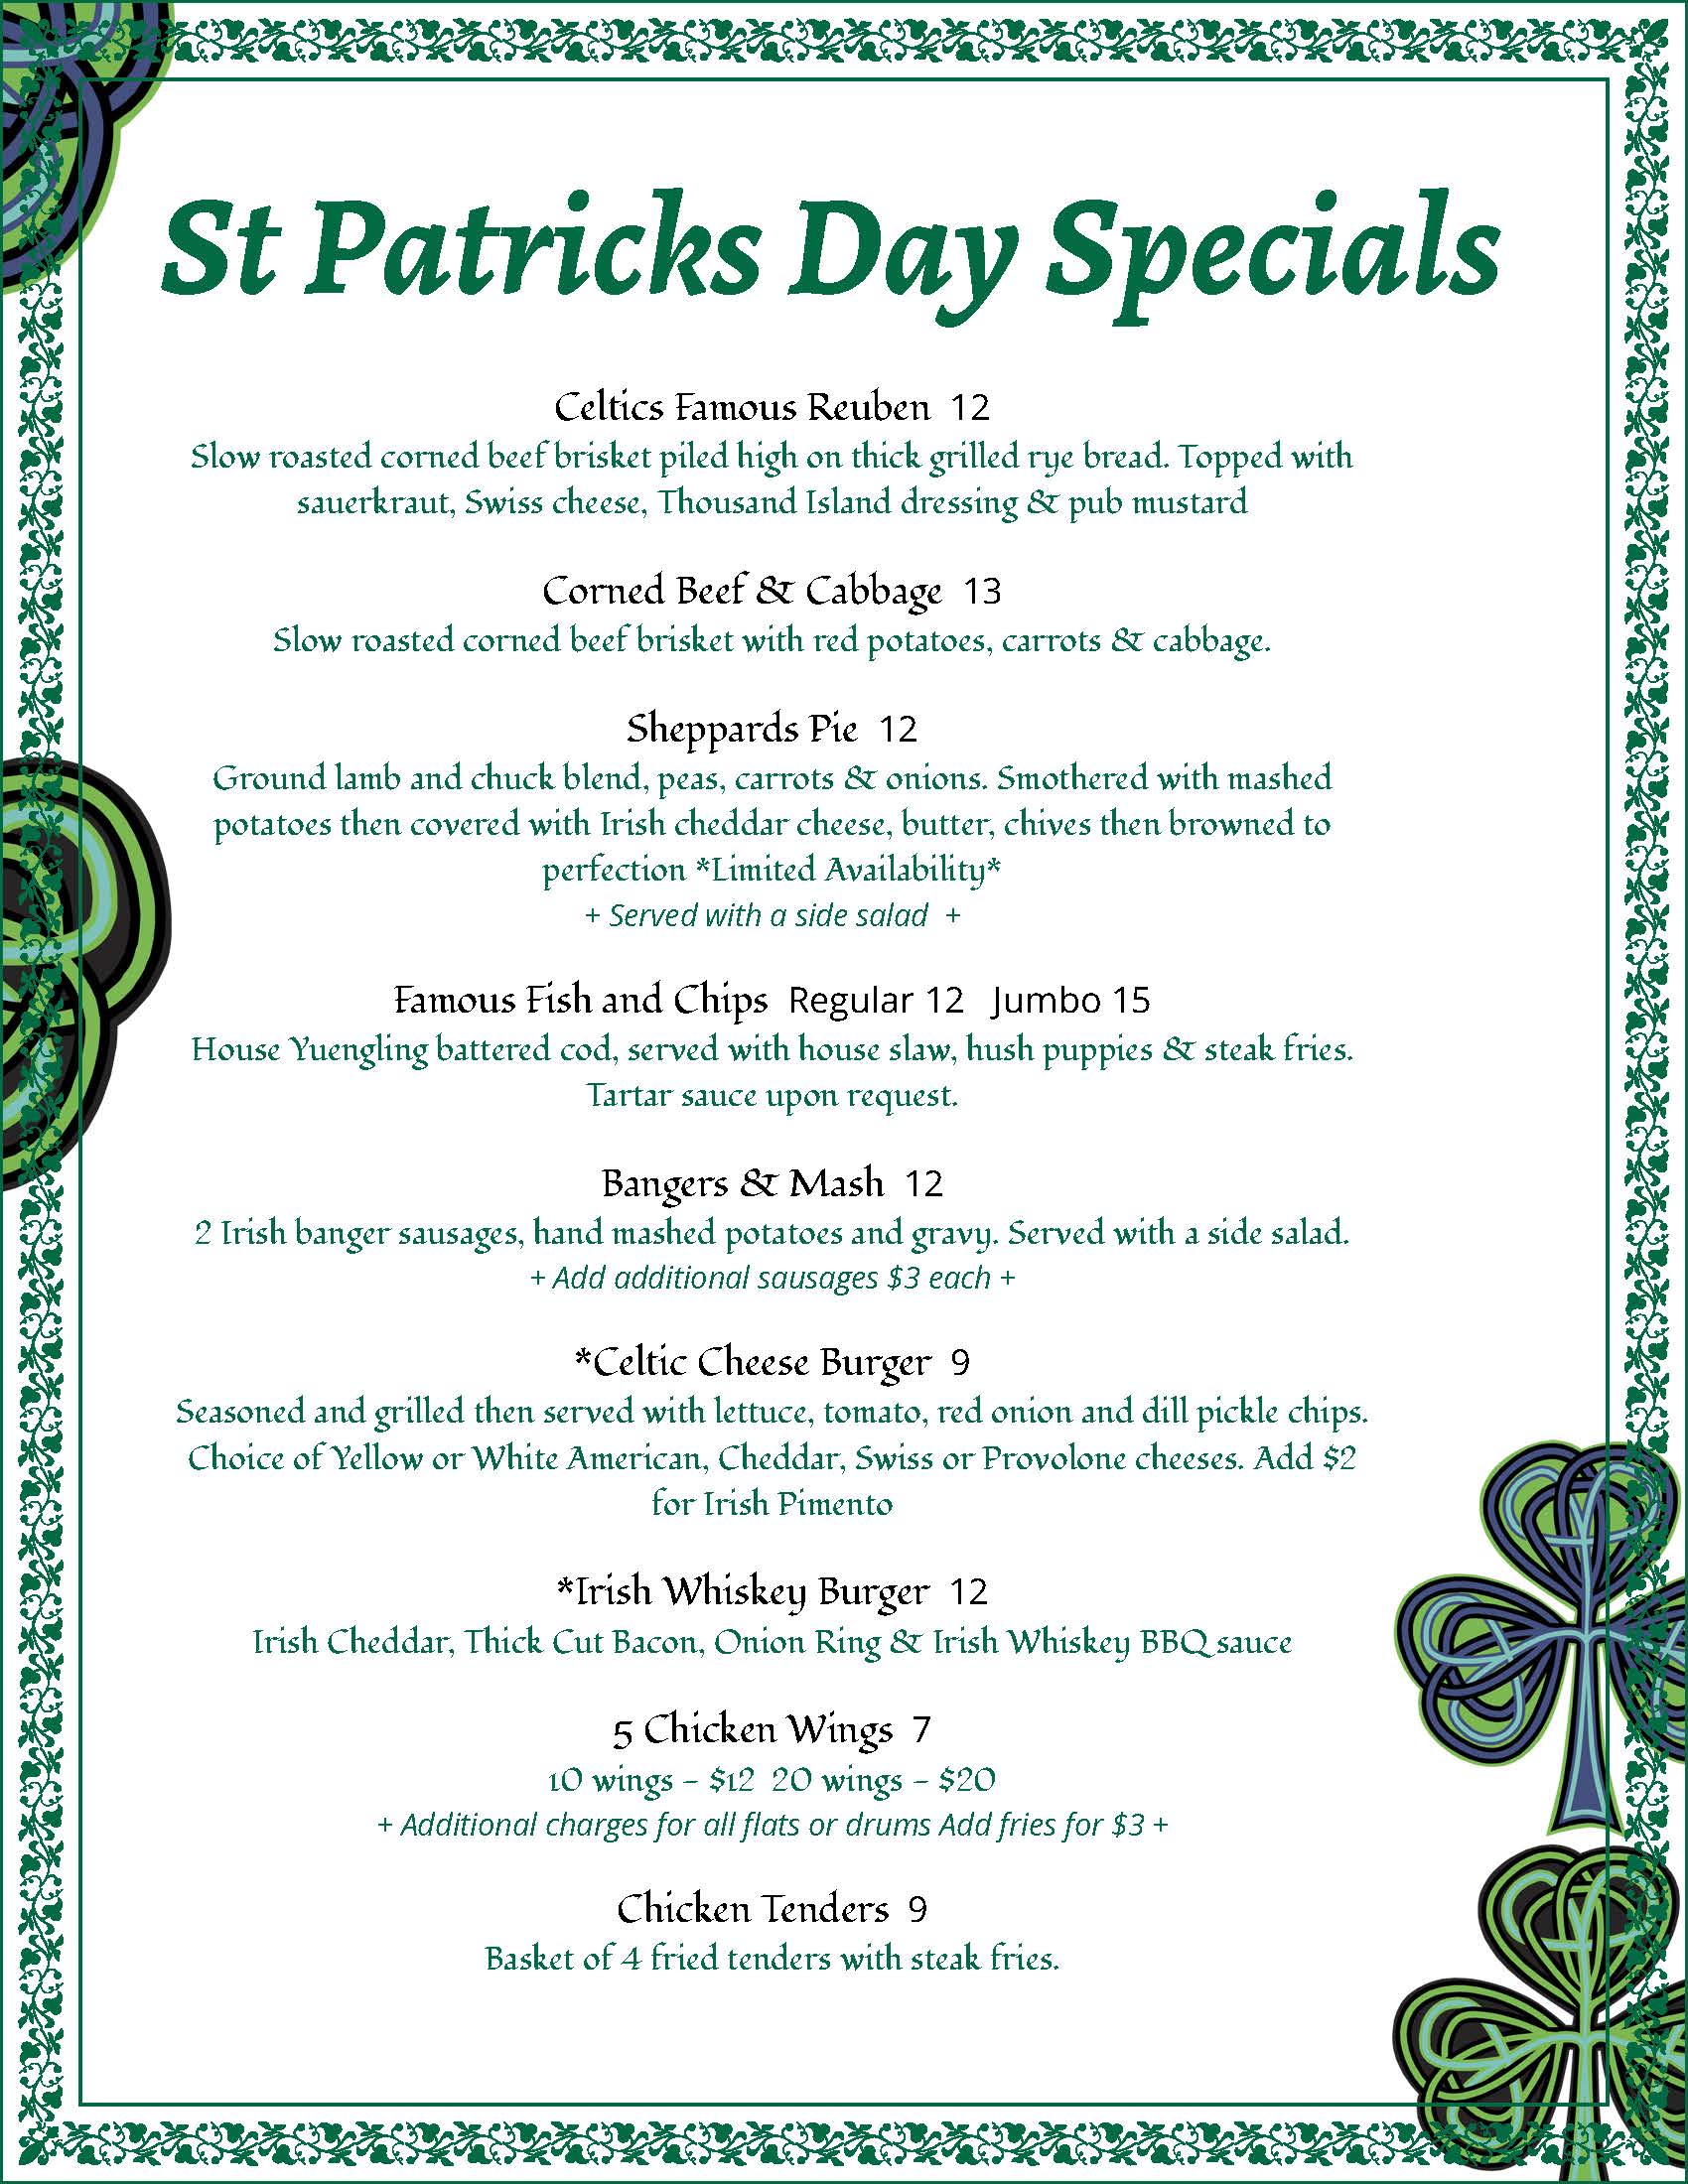 St. Patrick's Day Special Food and Drink Menus 2021